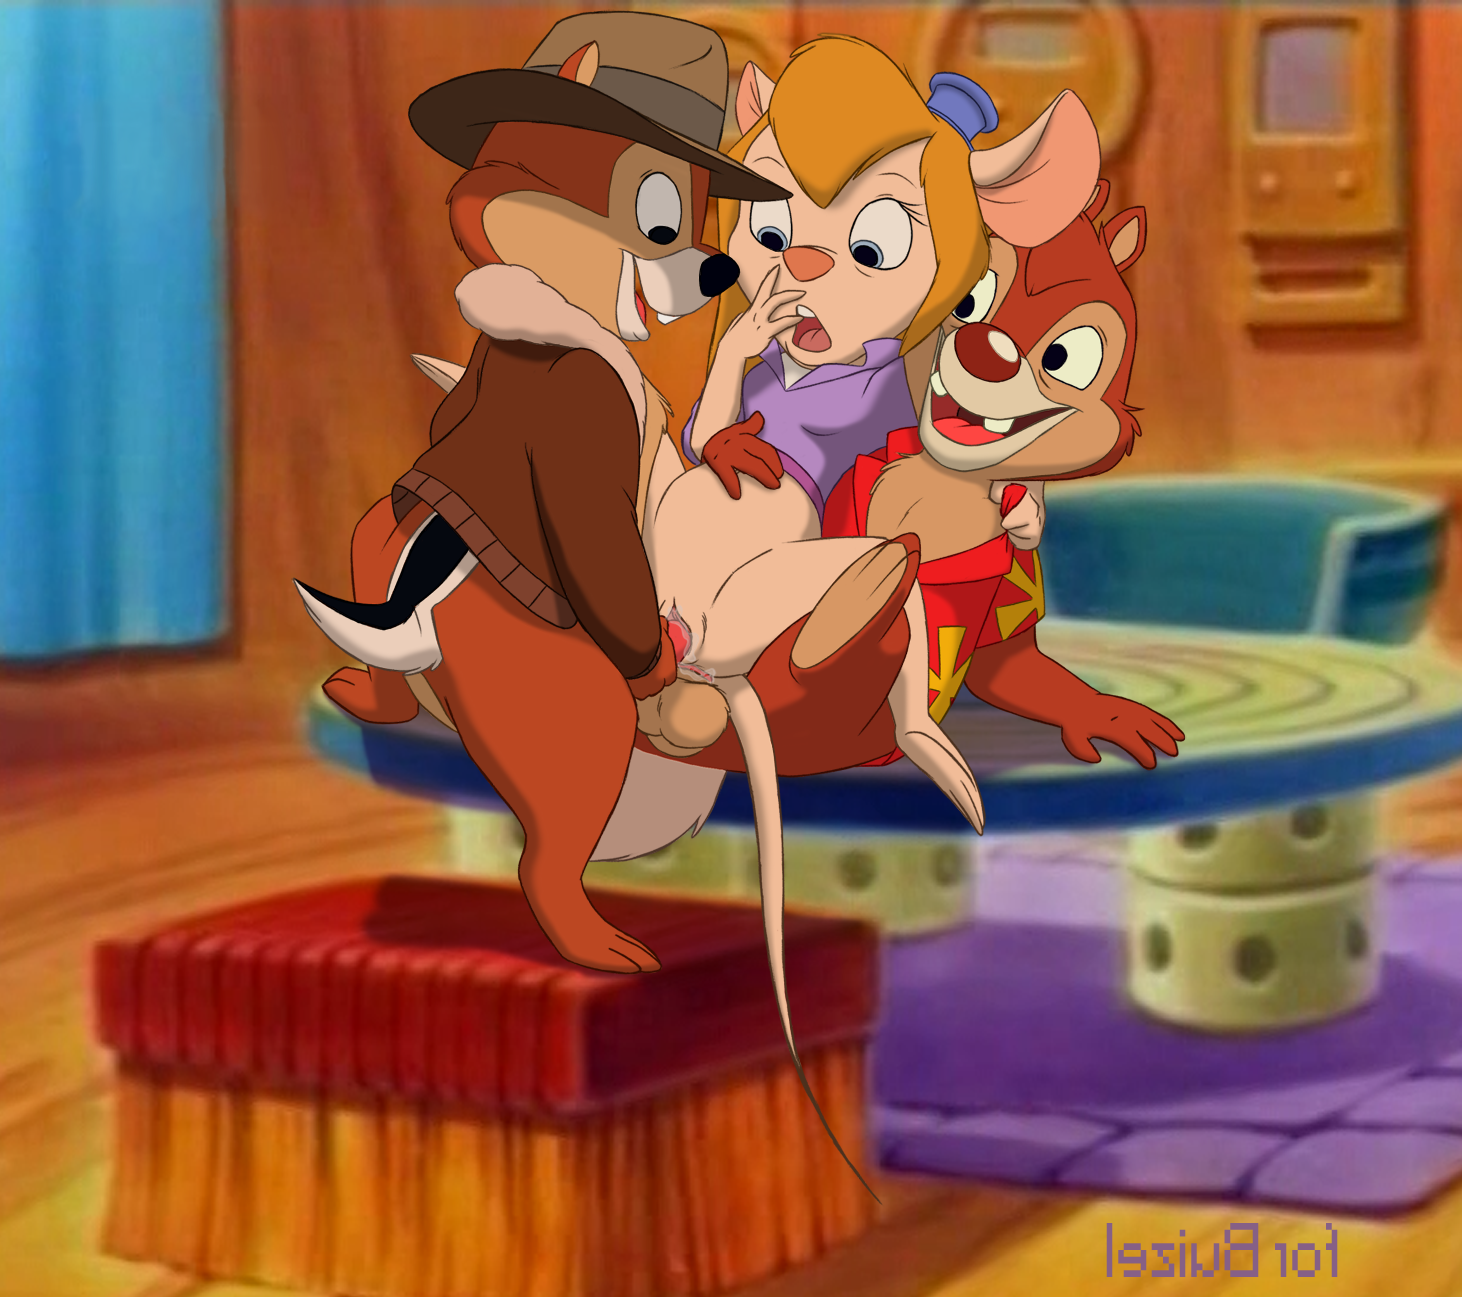 gadget hackwrench | chip and dale rescue rangers â€“ disney porn chip  #9351128514 chip 'n dale rescue rangers chipmunk dale disney gadget |  Disney Porn